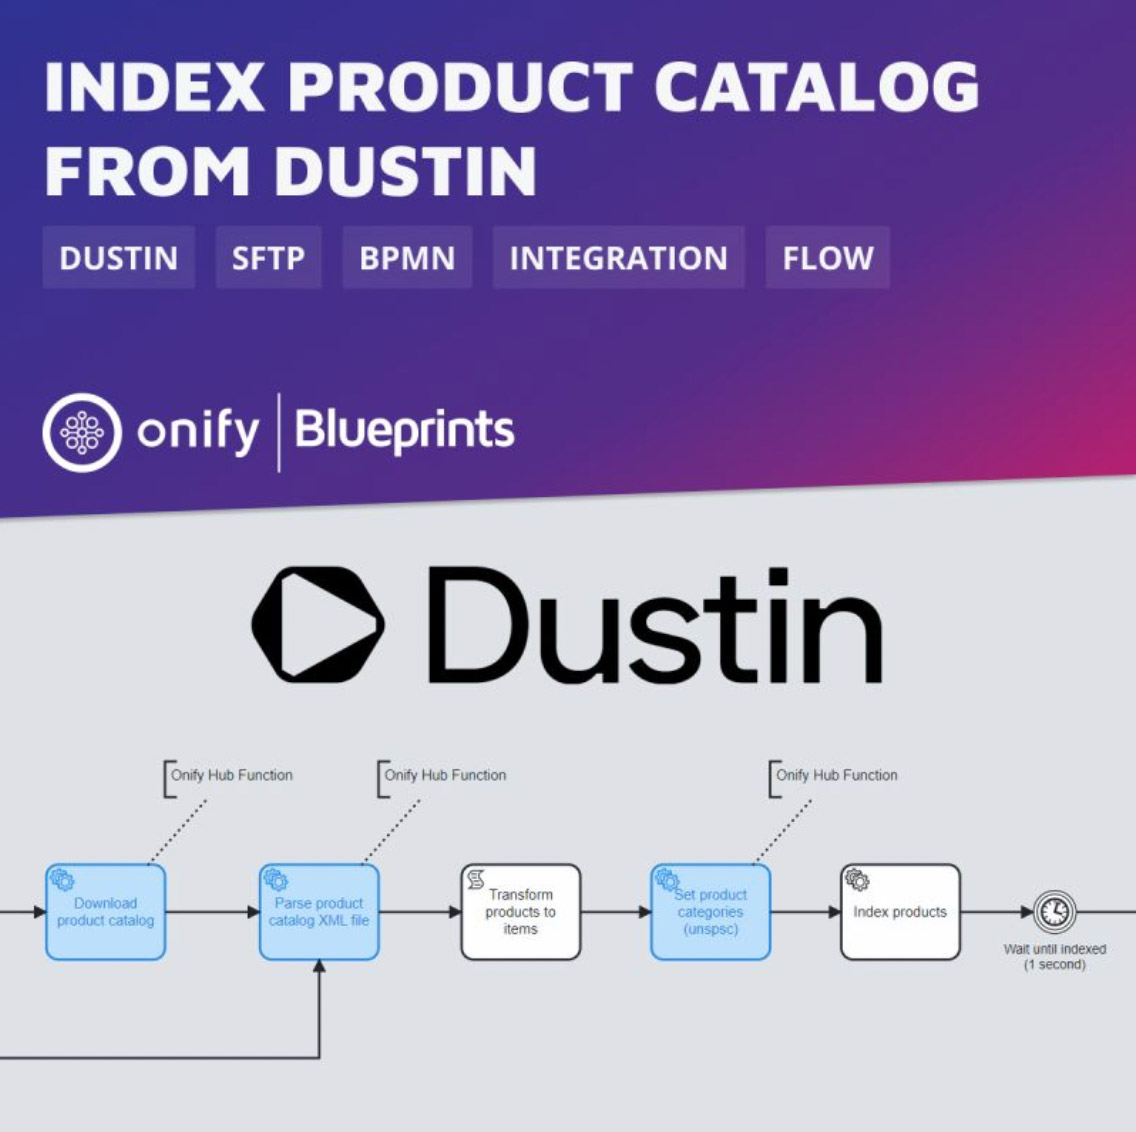 Onify Blueprint – Index product catalog from Dustin